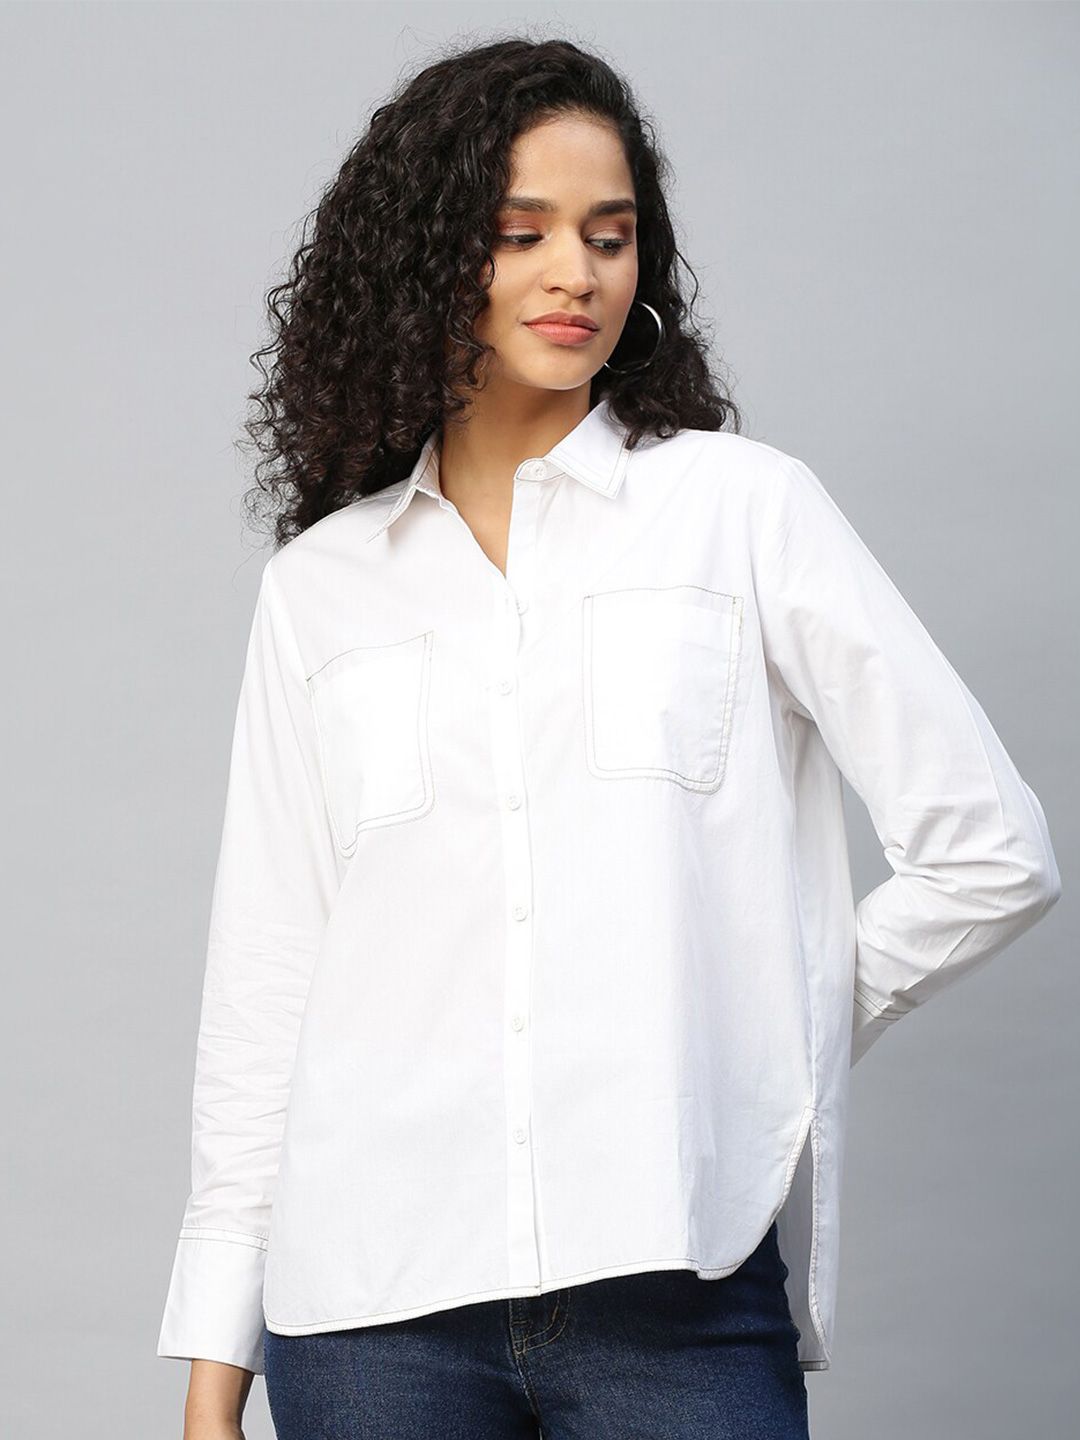 Chemistry White Shirt Style Top Price in India